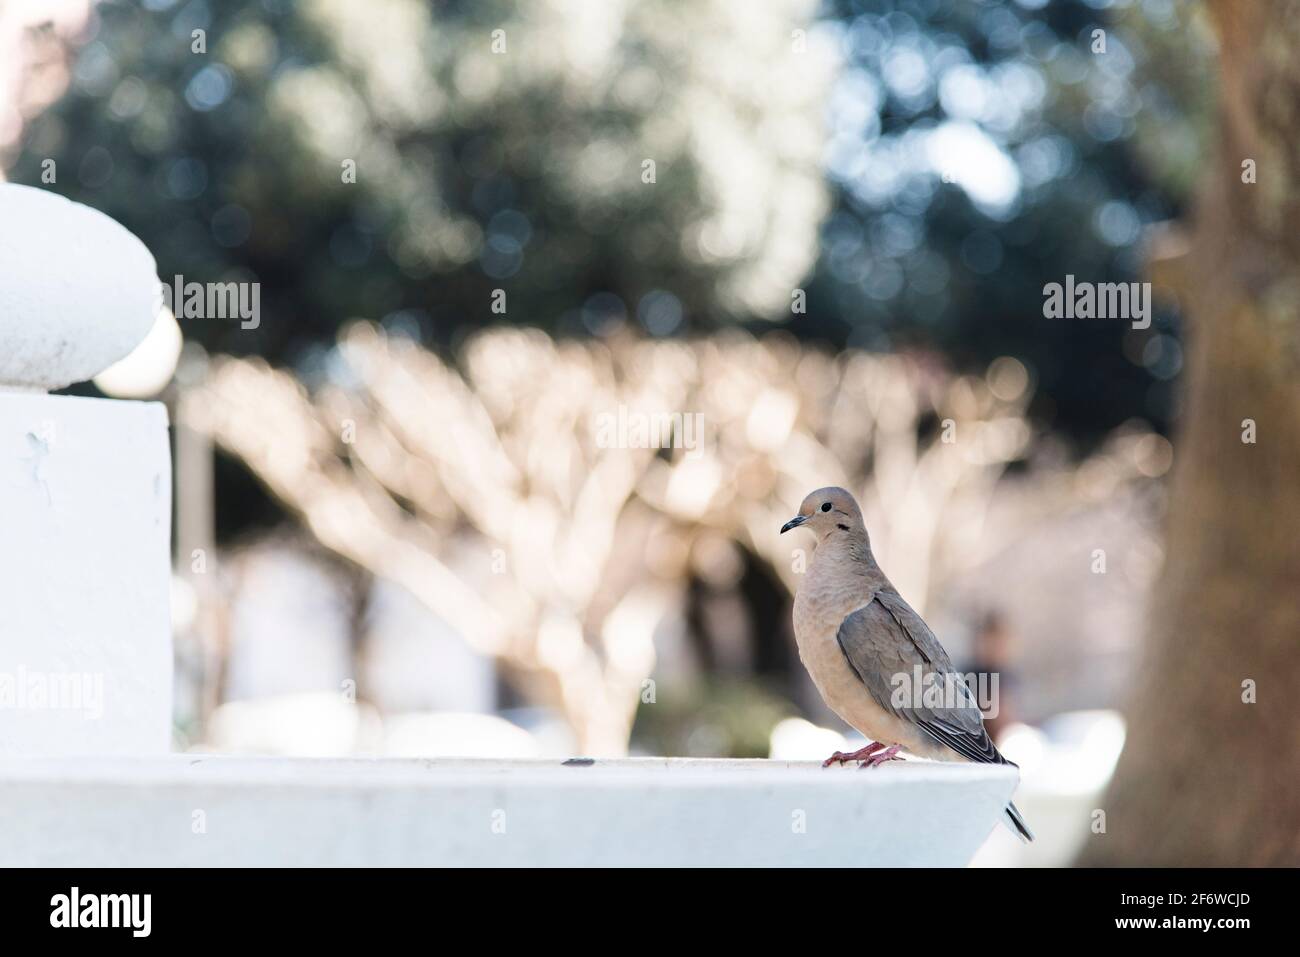 Adult eared dove, zenaida auriculata, perched on the edge of a fountain, in a park, on a sunny day. Side view. Image with copy space. Stock Photo